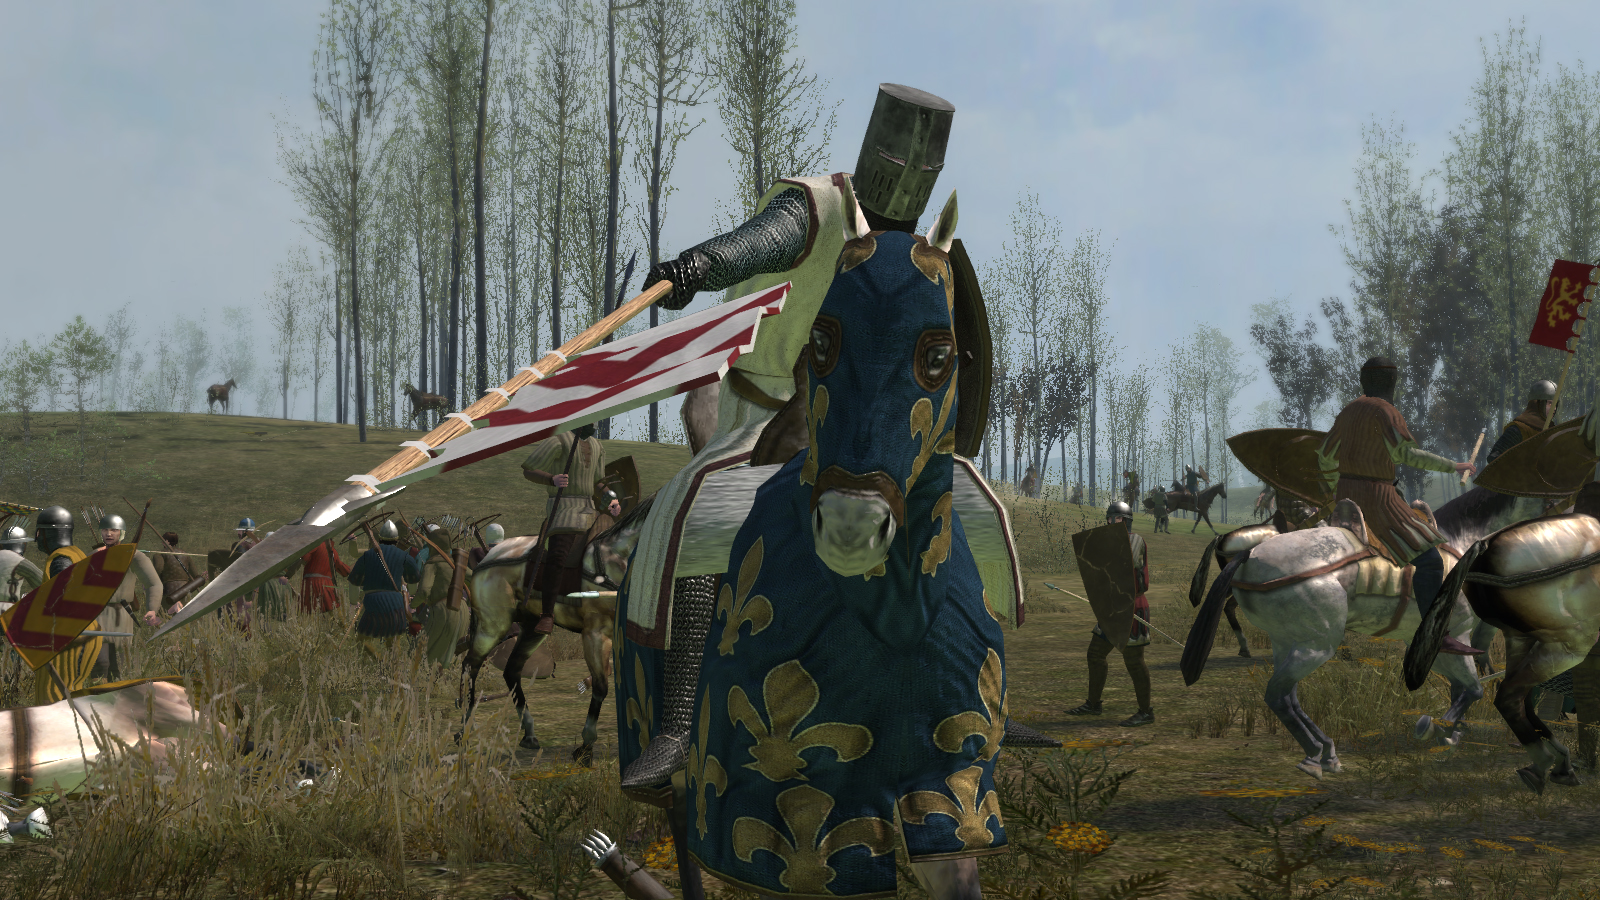 Anno domini warband. Mount and Blade Warband anno Domini 1257. Mount & Blade: Warband. Маунт блейд мод Анно Домини 1257. Mount and Blade 2 Bannerlord ad 1257.